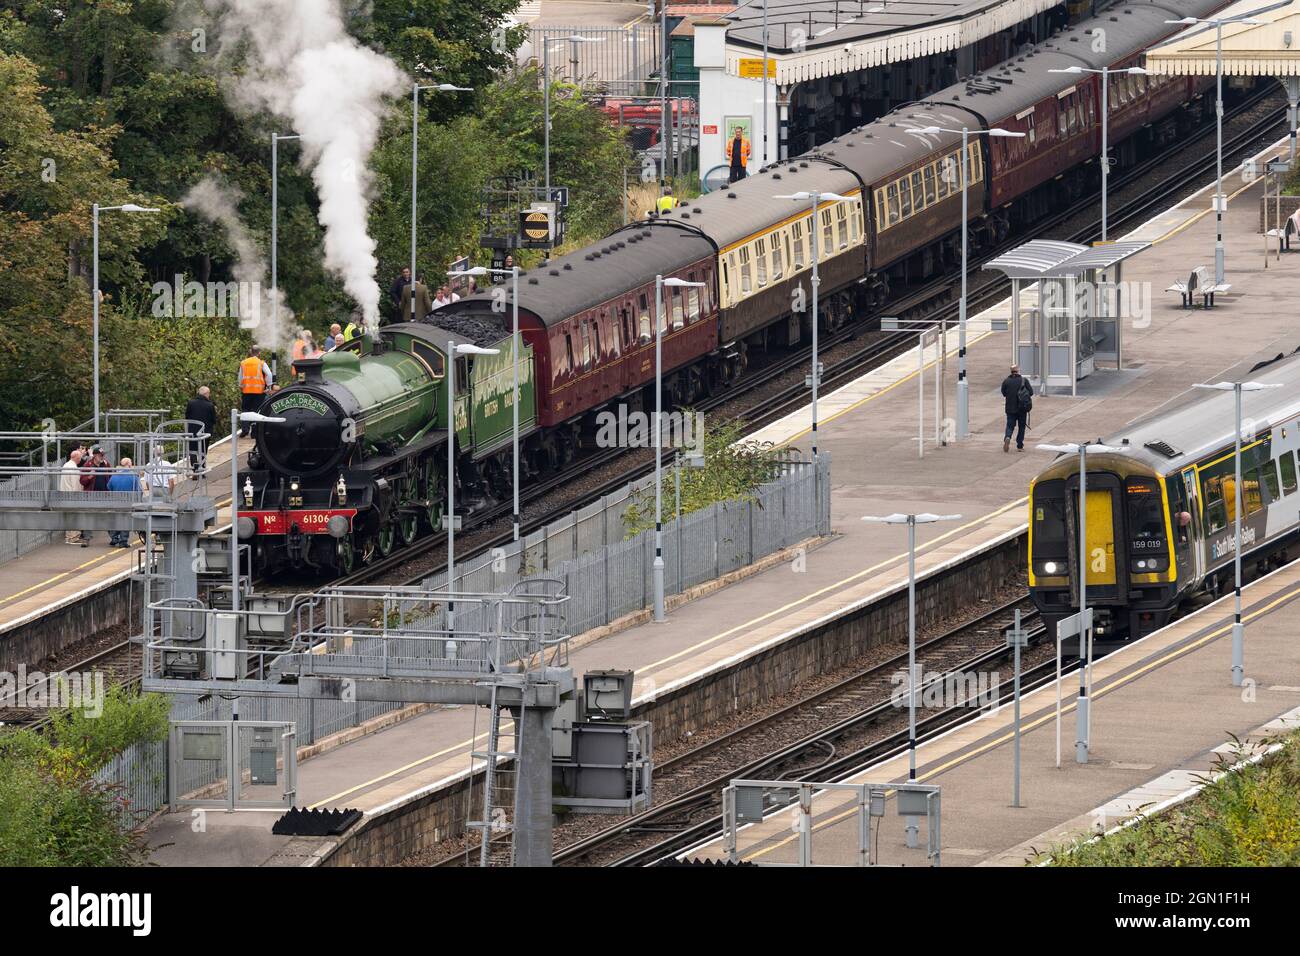 The Mayflower 61306 B1 steam locomotive painted in the early British Railways apple green livery, with passengers at Basingstoke train station, UK Stock Photo